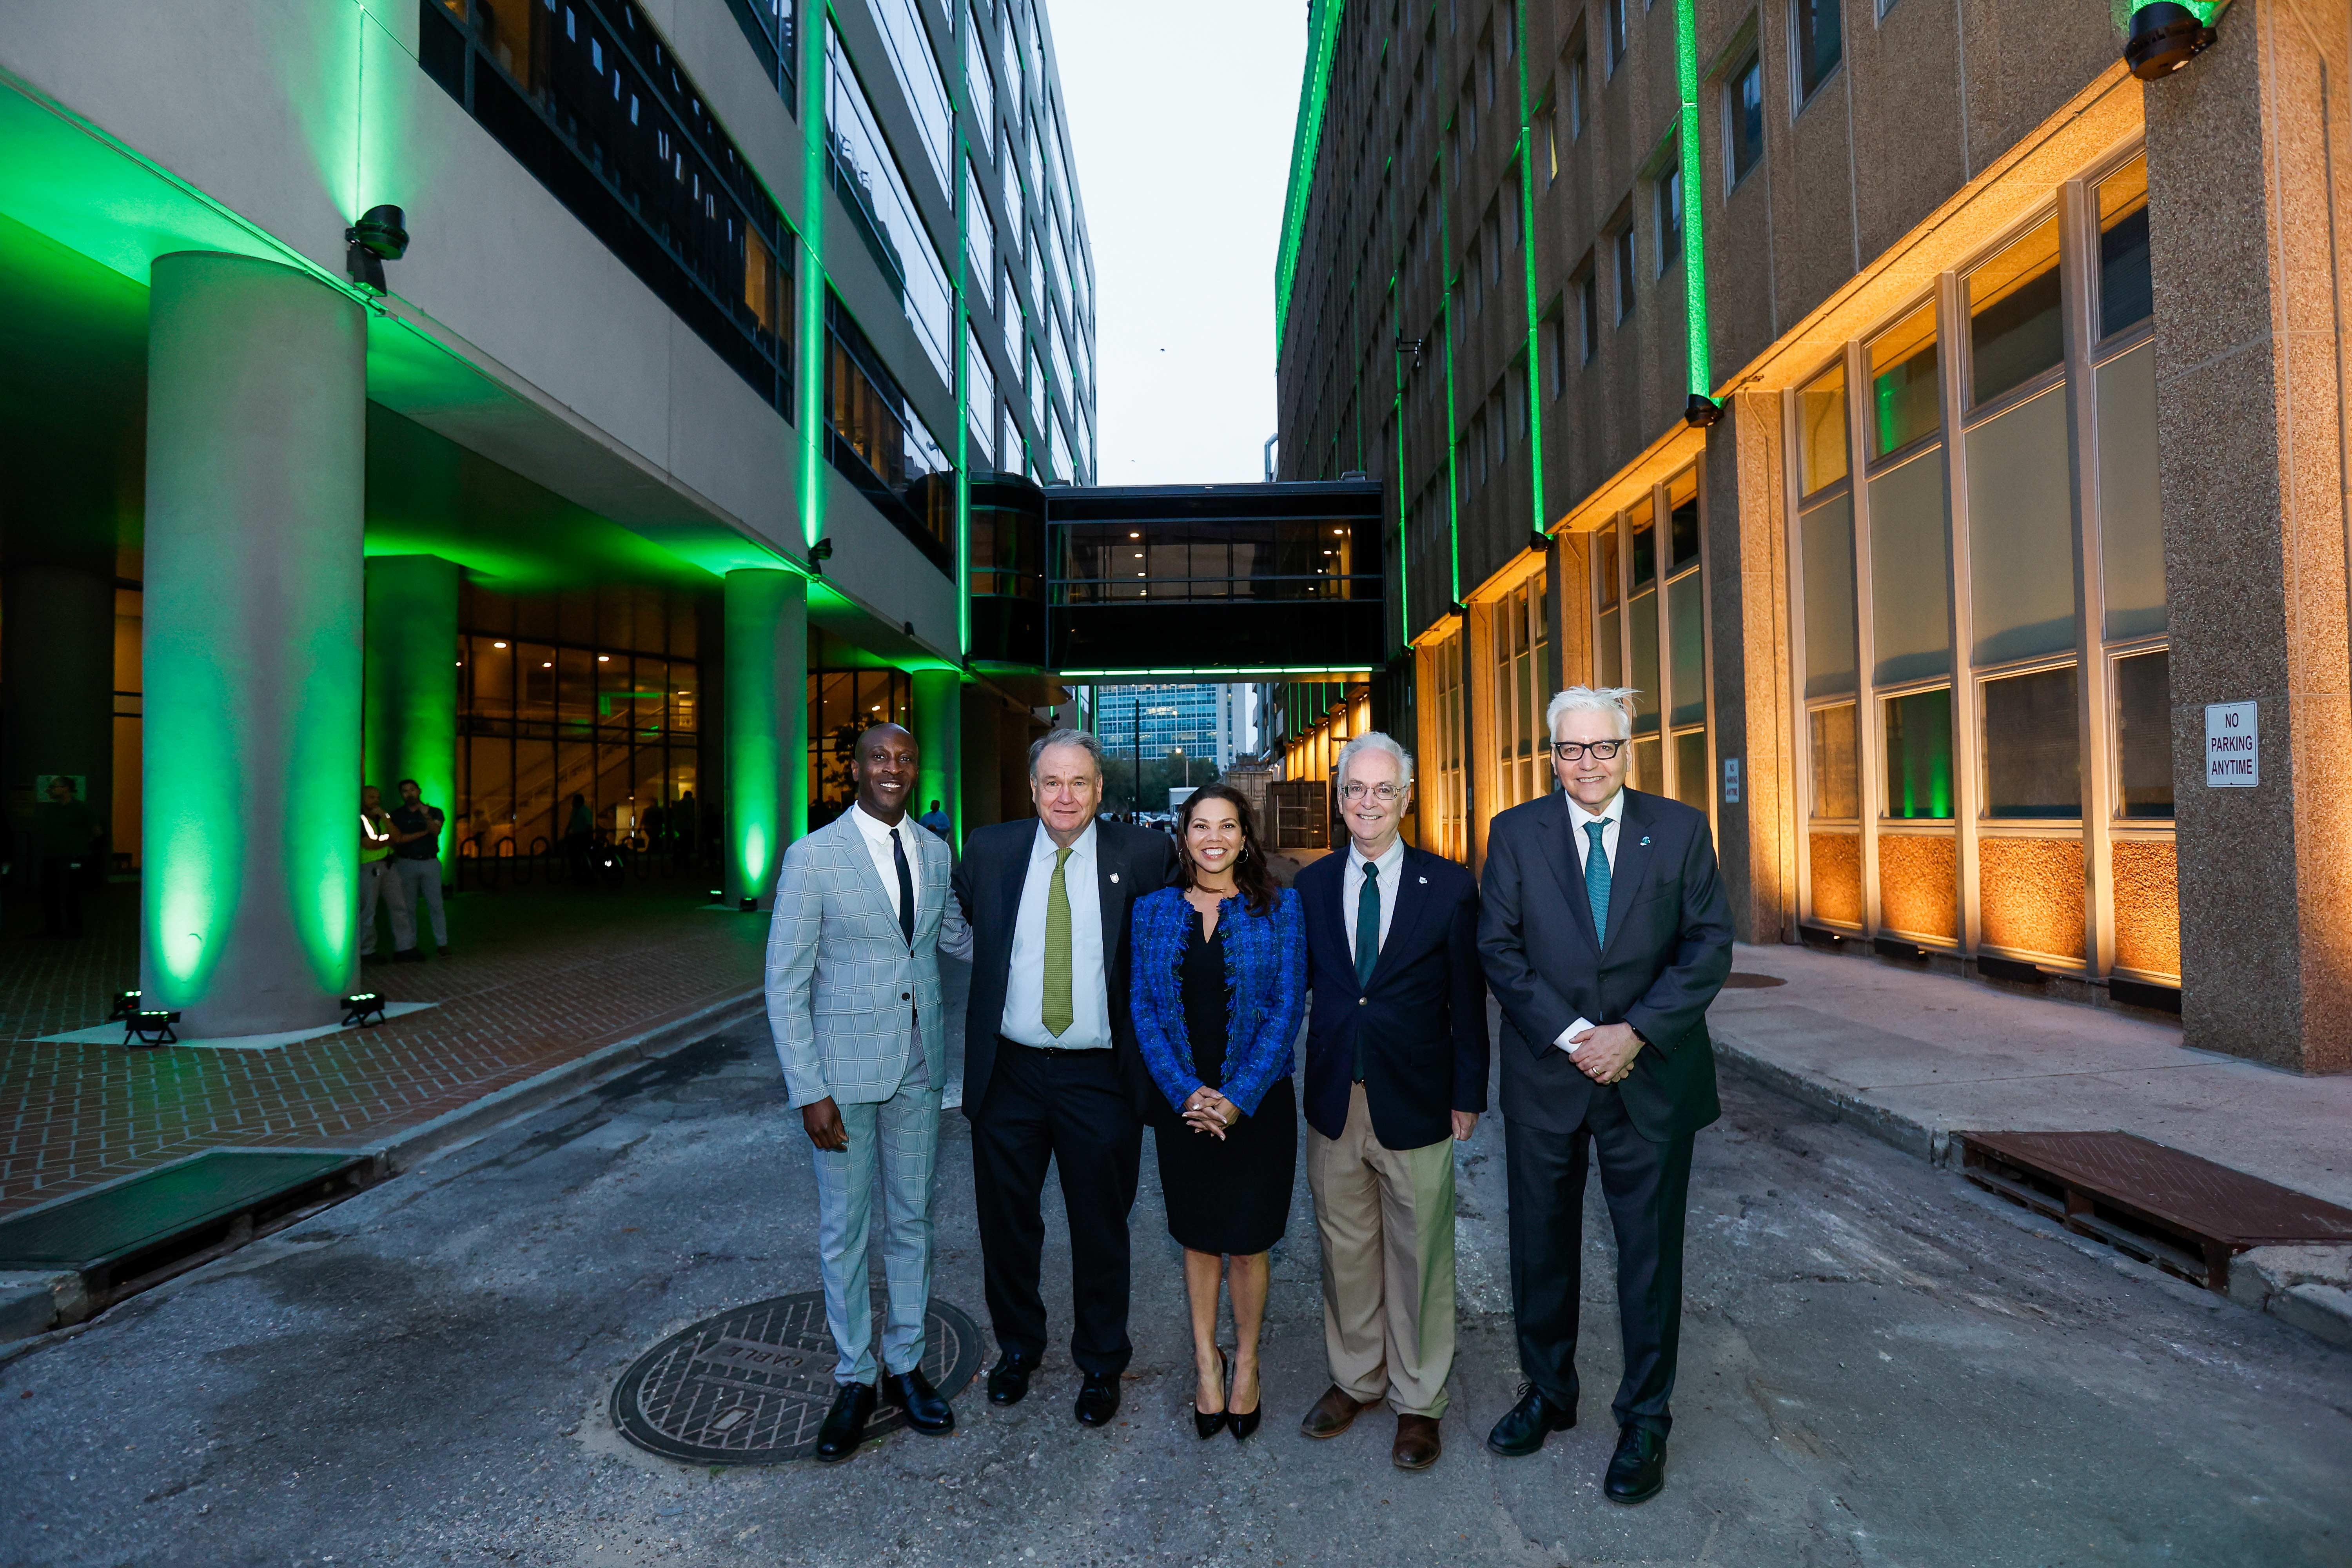  (Left to right) Davon Barbour, president and CEO of the Downtown Development District, Tulane University President Michael A. Fitts, Distrcit B Councilmember Lesli Harris, Dr. Lee Hamm, dean of Tulane School of Medicine and Chief Operating Officer Patrick Norton.